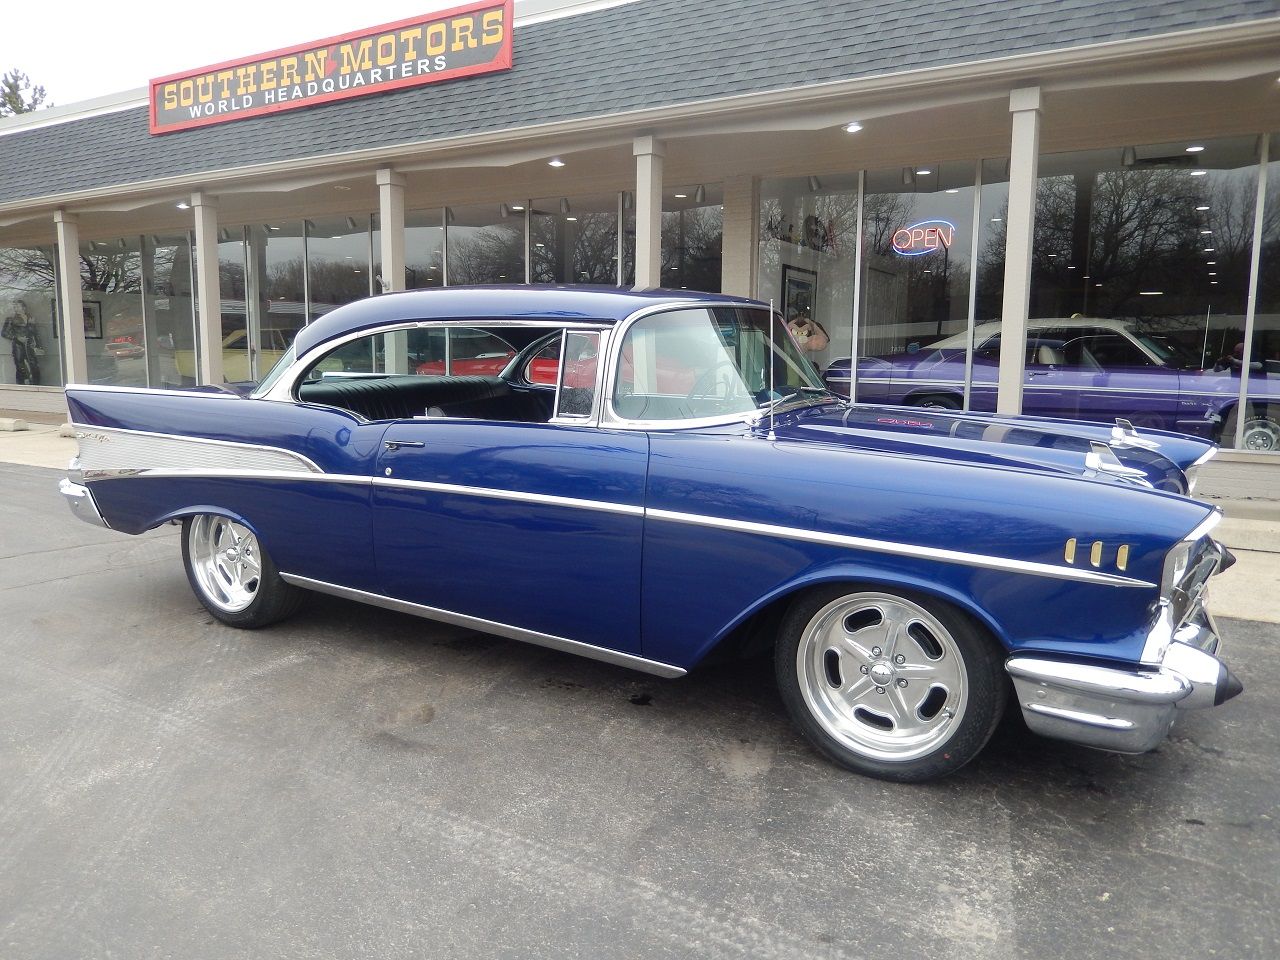  Chevrolet Bel Air 2 DR. Coupe